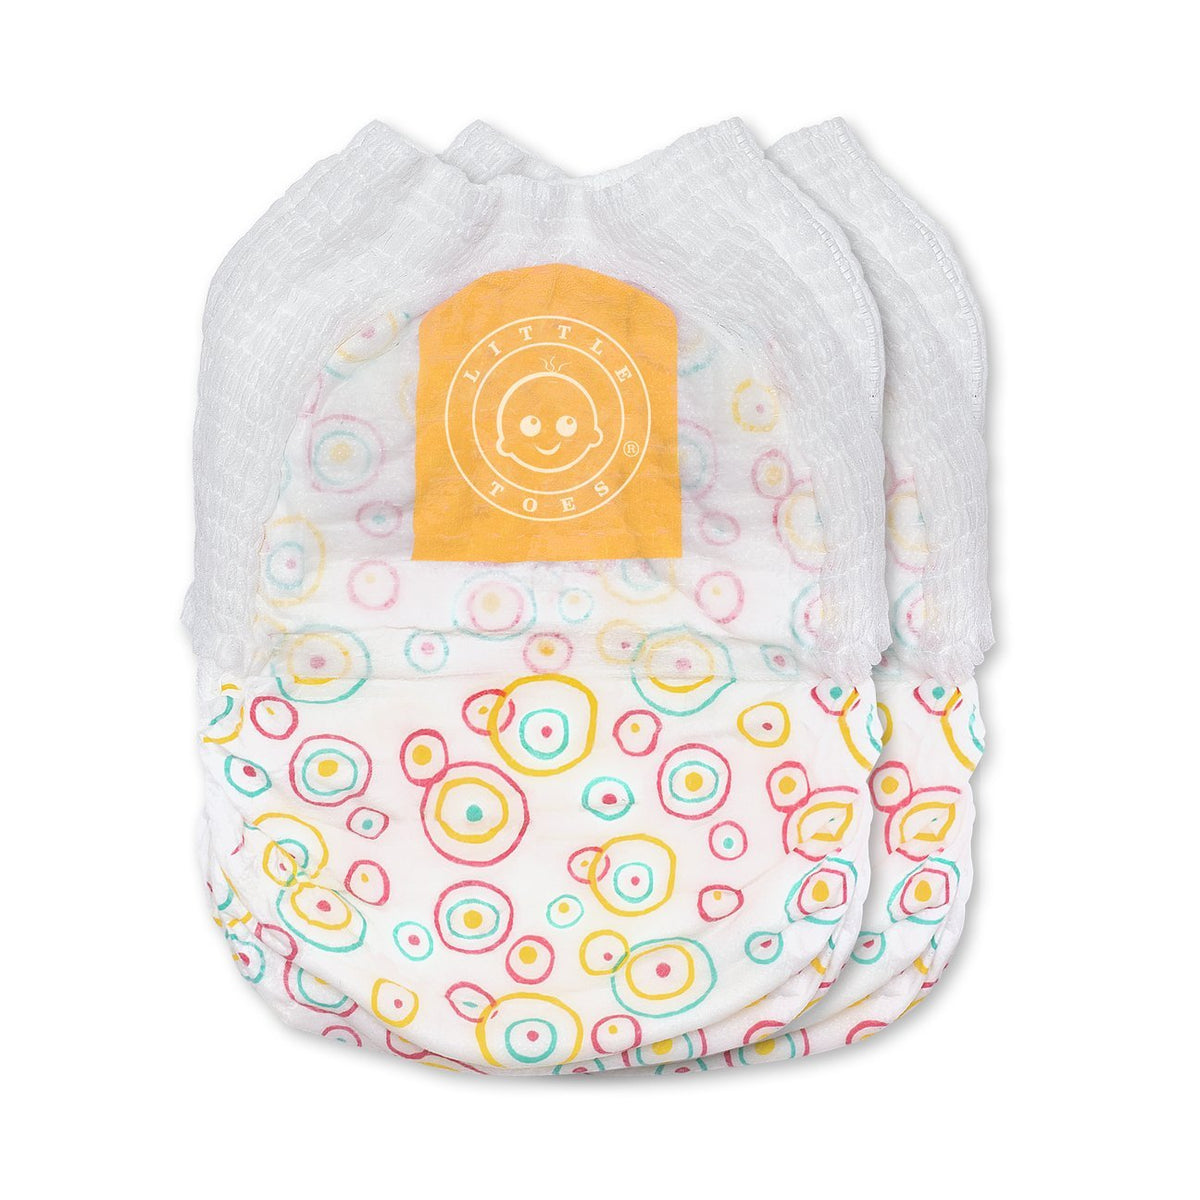 Little Toes Convenience On The Go 2x Swimmy Diapers medium size pack